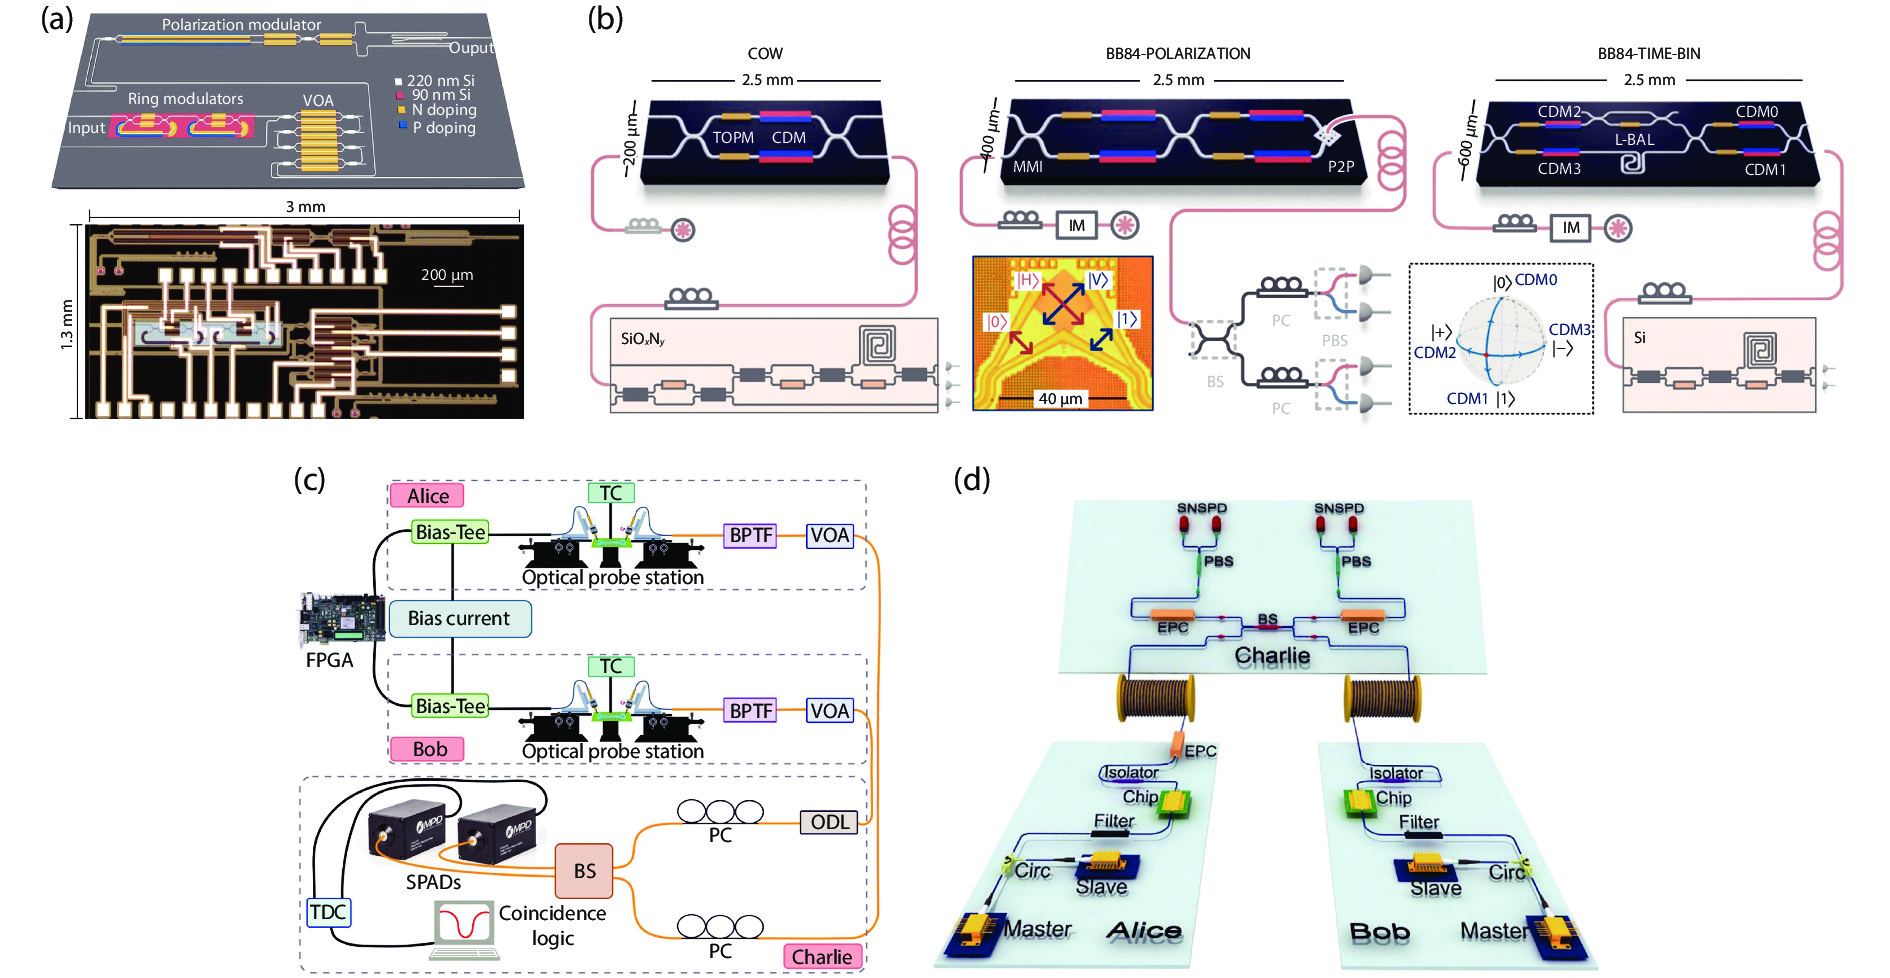 (Color online) Integrated silicon photonic QKD transmitters. (a) Polarization-encoding PM-QKD transmitter, consisting of ring modulators, VOAs, and polarization modulators[12]. (b) Three implementations of high-speed QKD[11]. (c) HOM interference between WCPs generated by III–V on silicon waveguide integrated lasers[22]. (d) Polarization-encoding MDI-QKD with integrated silicon photonics[24].